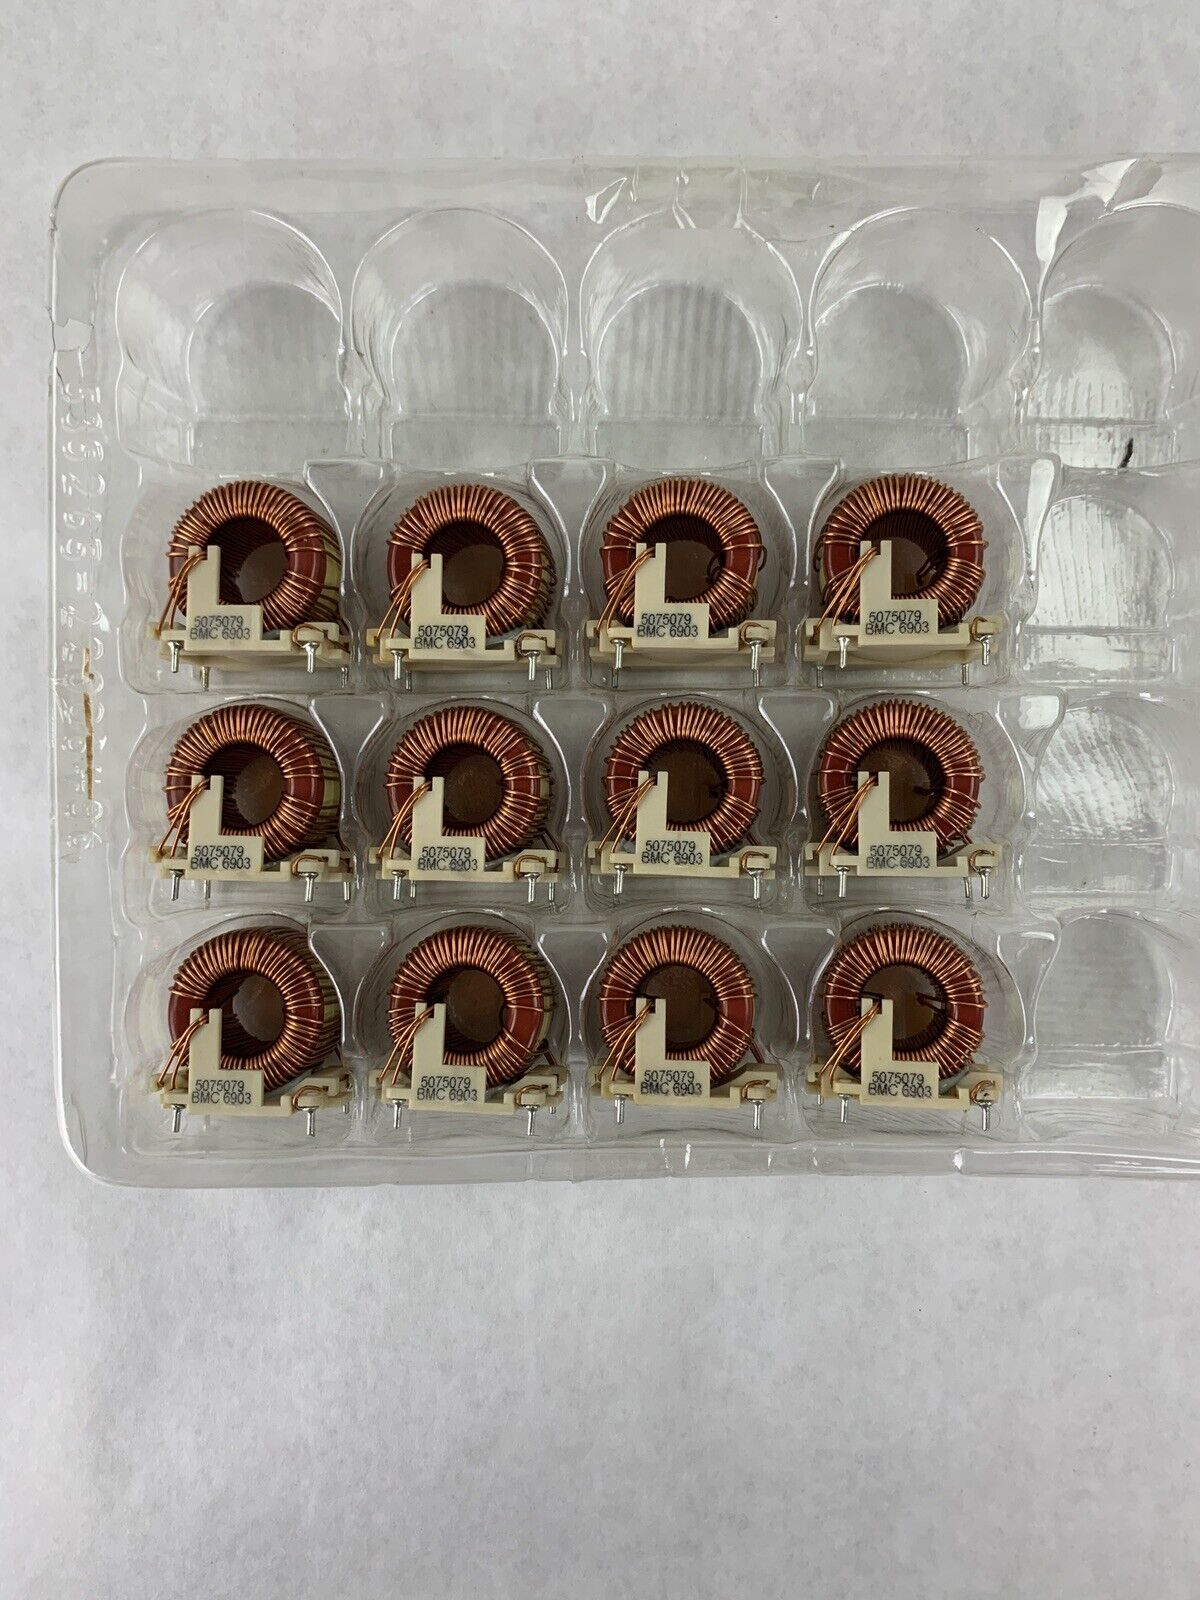 Lot of 12 Better Magnetics Corp Common Mode Choke Inductor BMC 6903 5075079